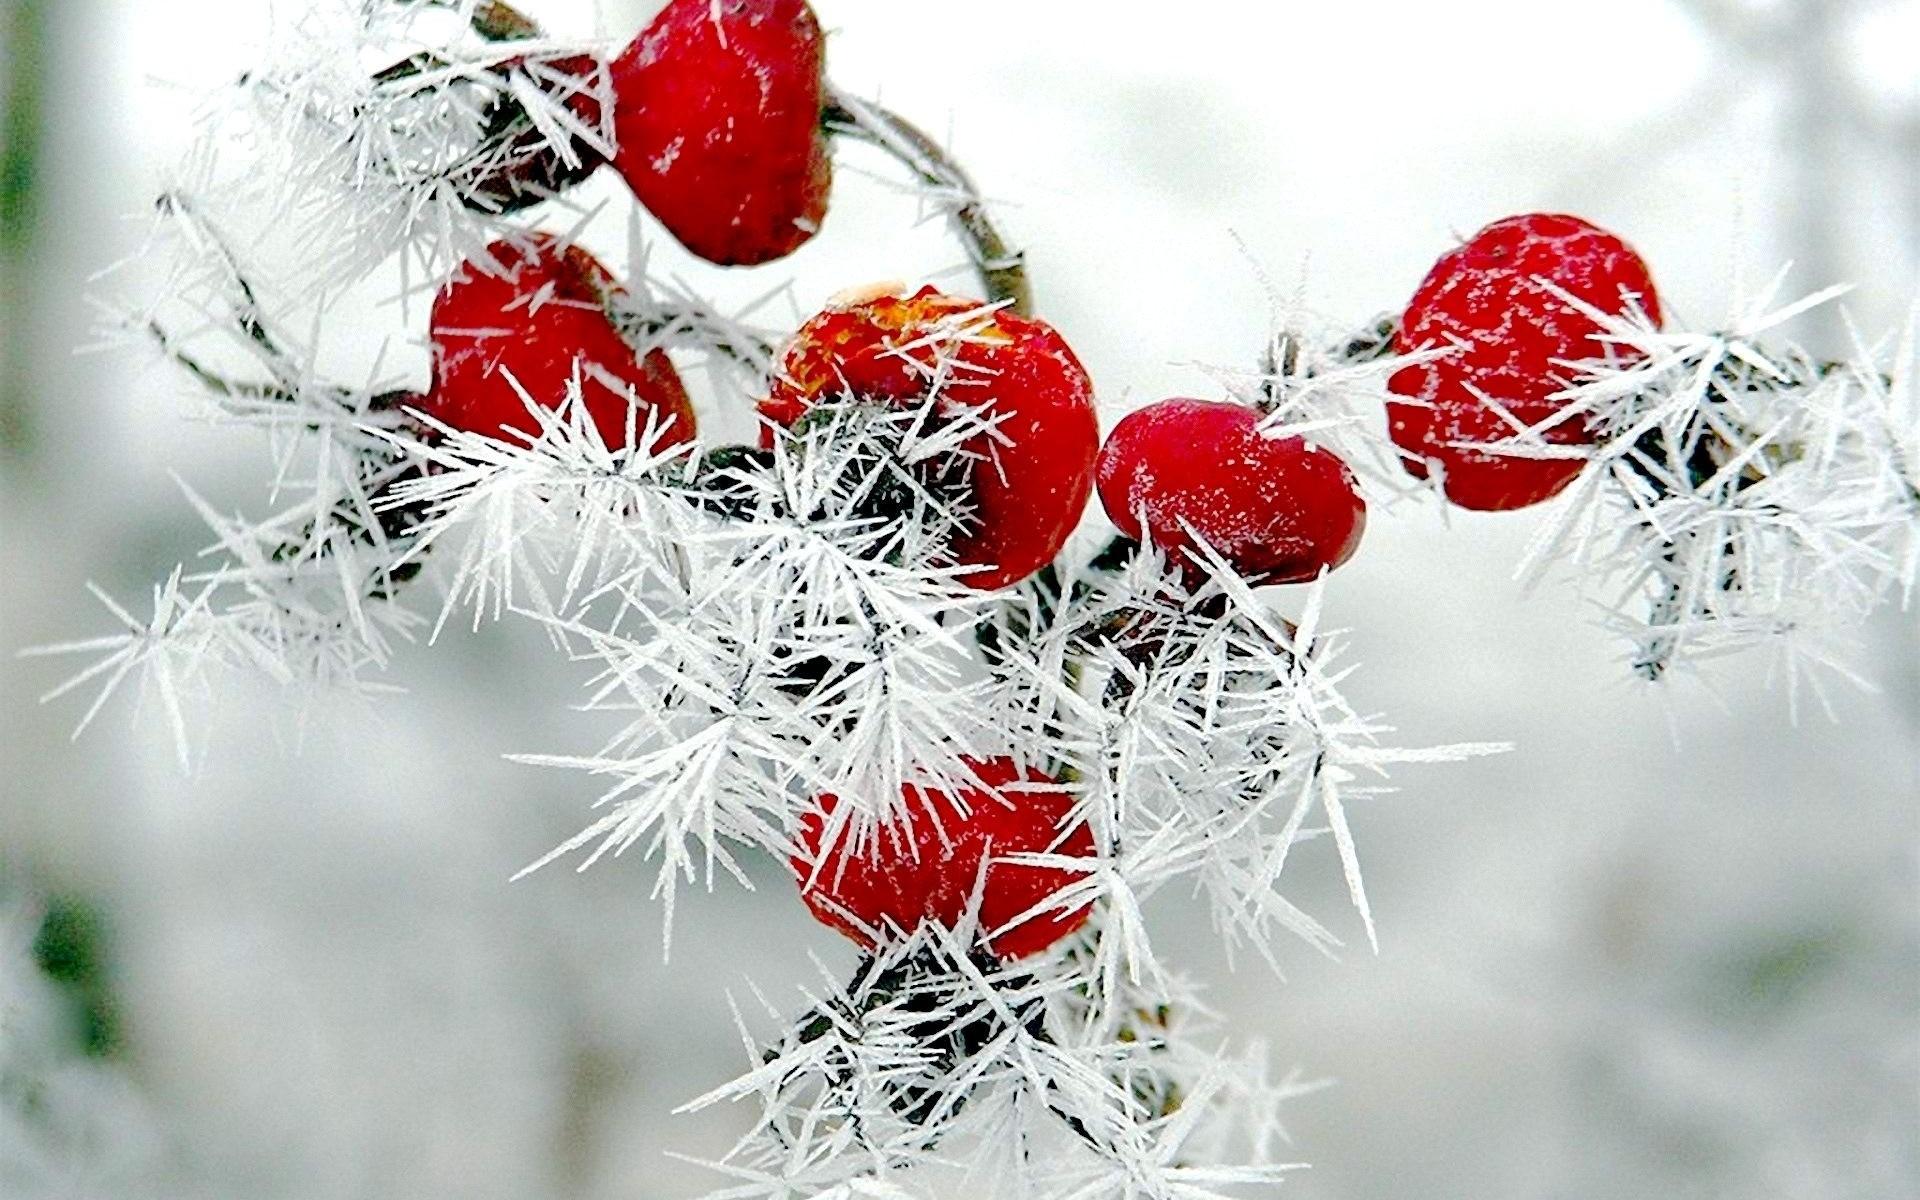 Berries, cool Image, nature Snow, Frost, Rose, Colourful